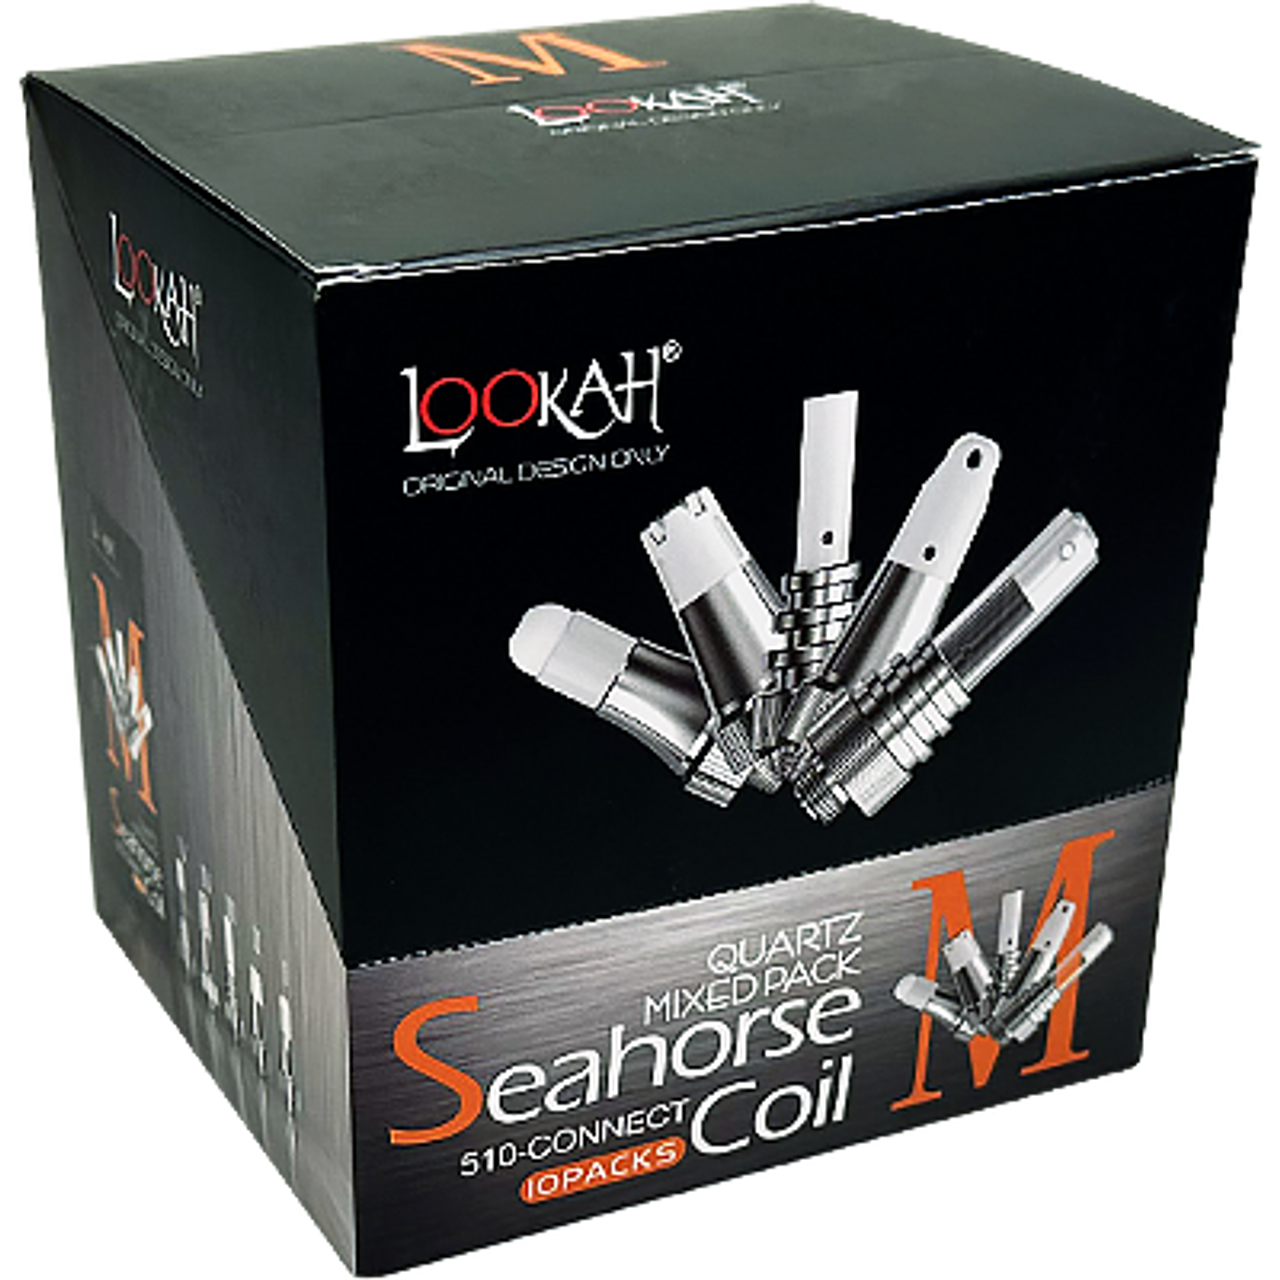 Buy Lookah Seahorse Replacement Coils  Quality Vape Accessories -   — MyVpro